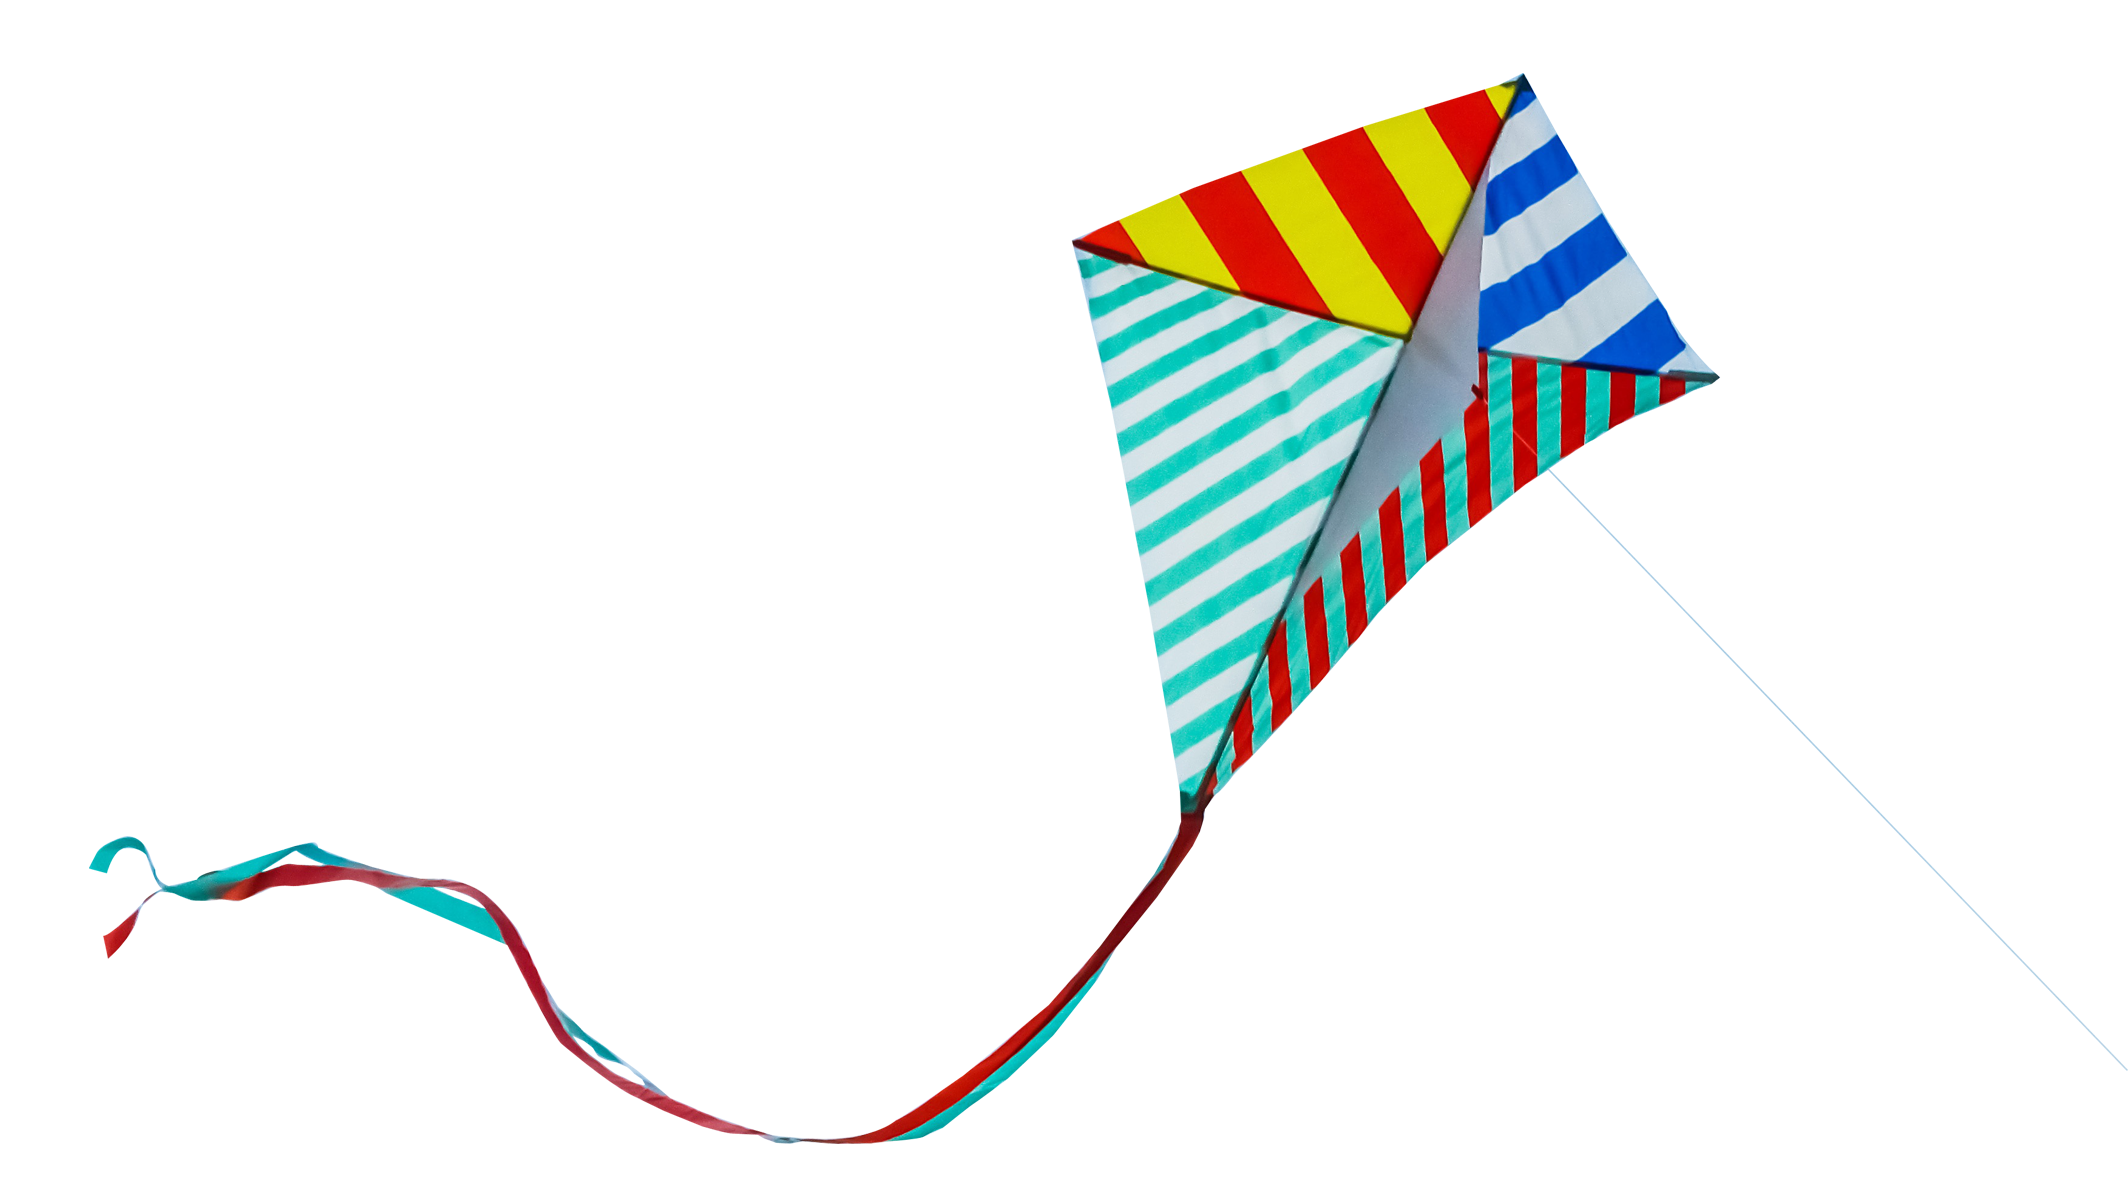 Png transparent image best. Kite clipart colorful kite